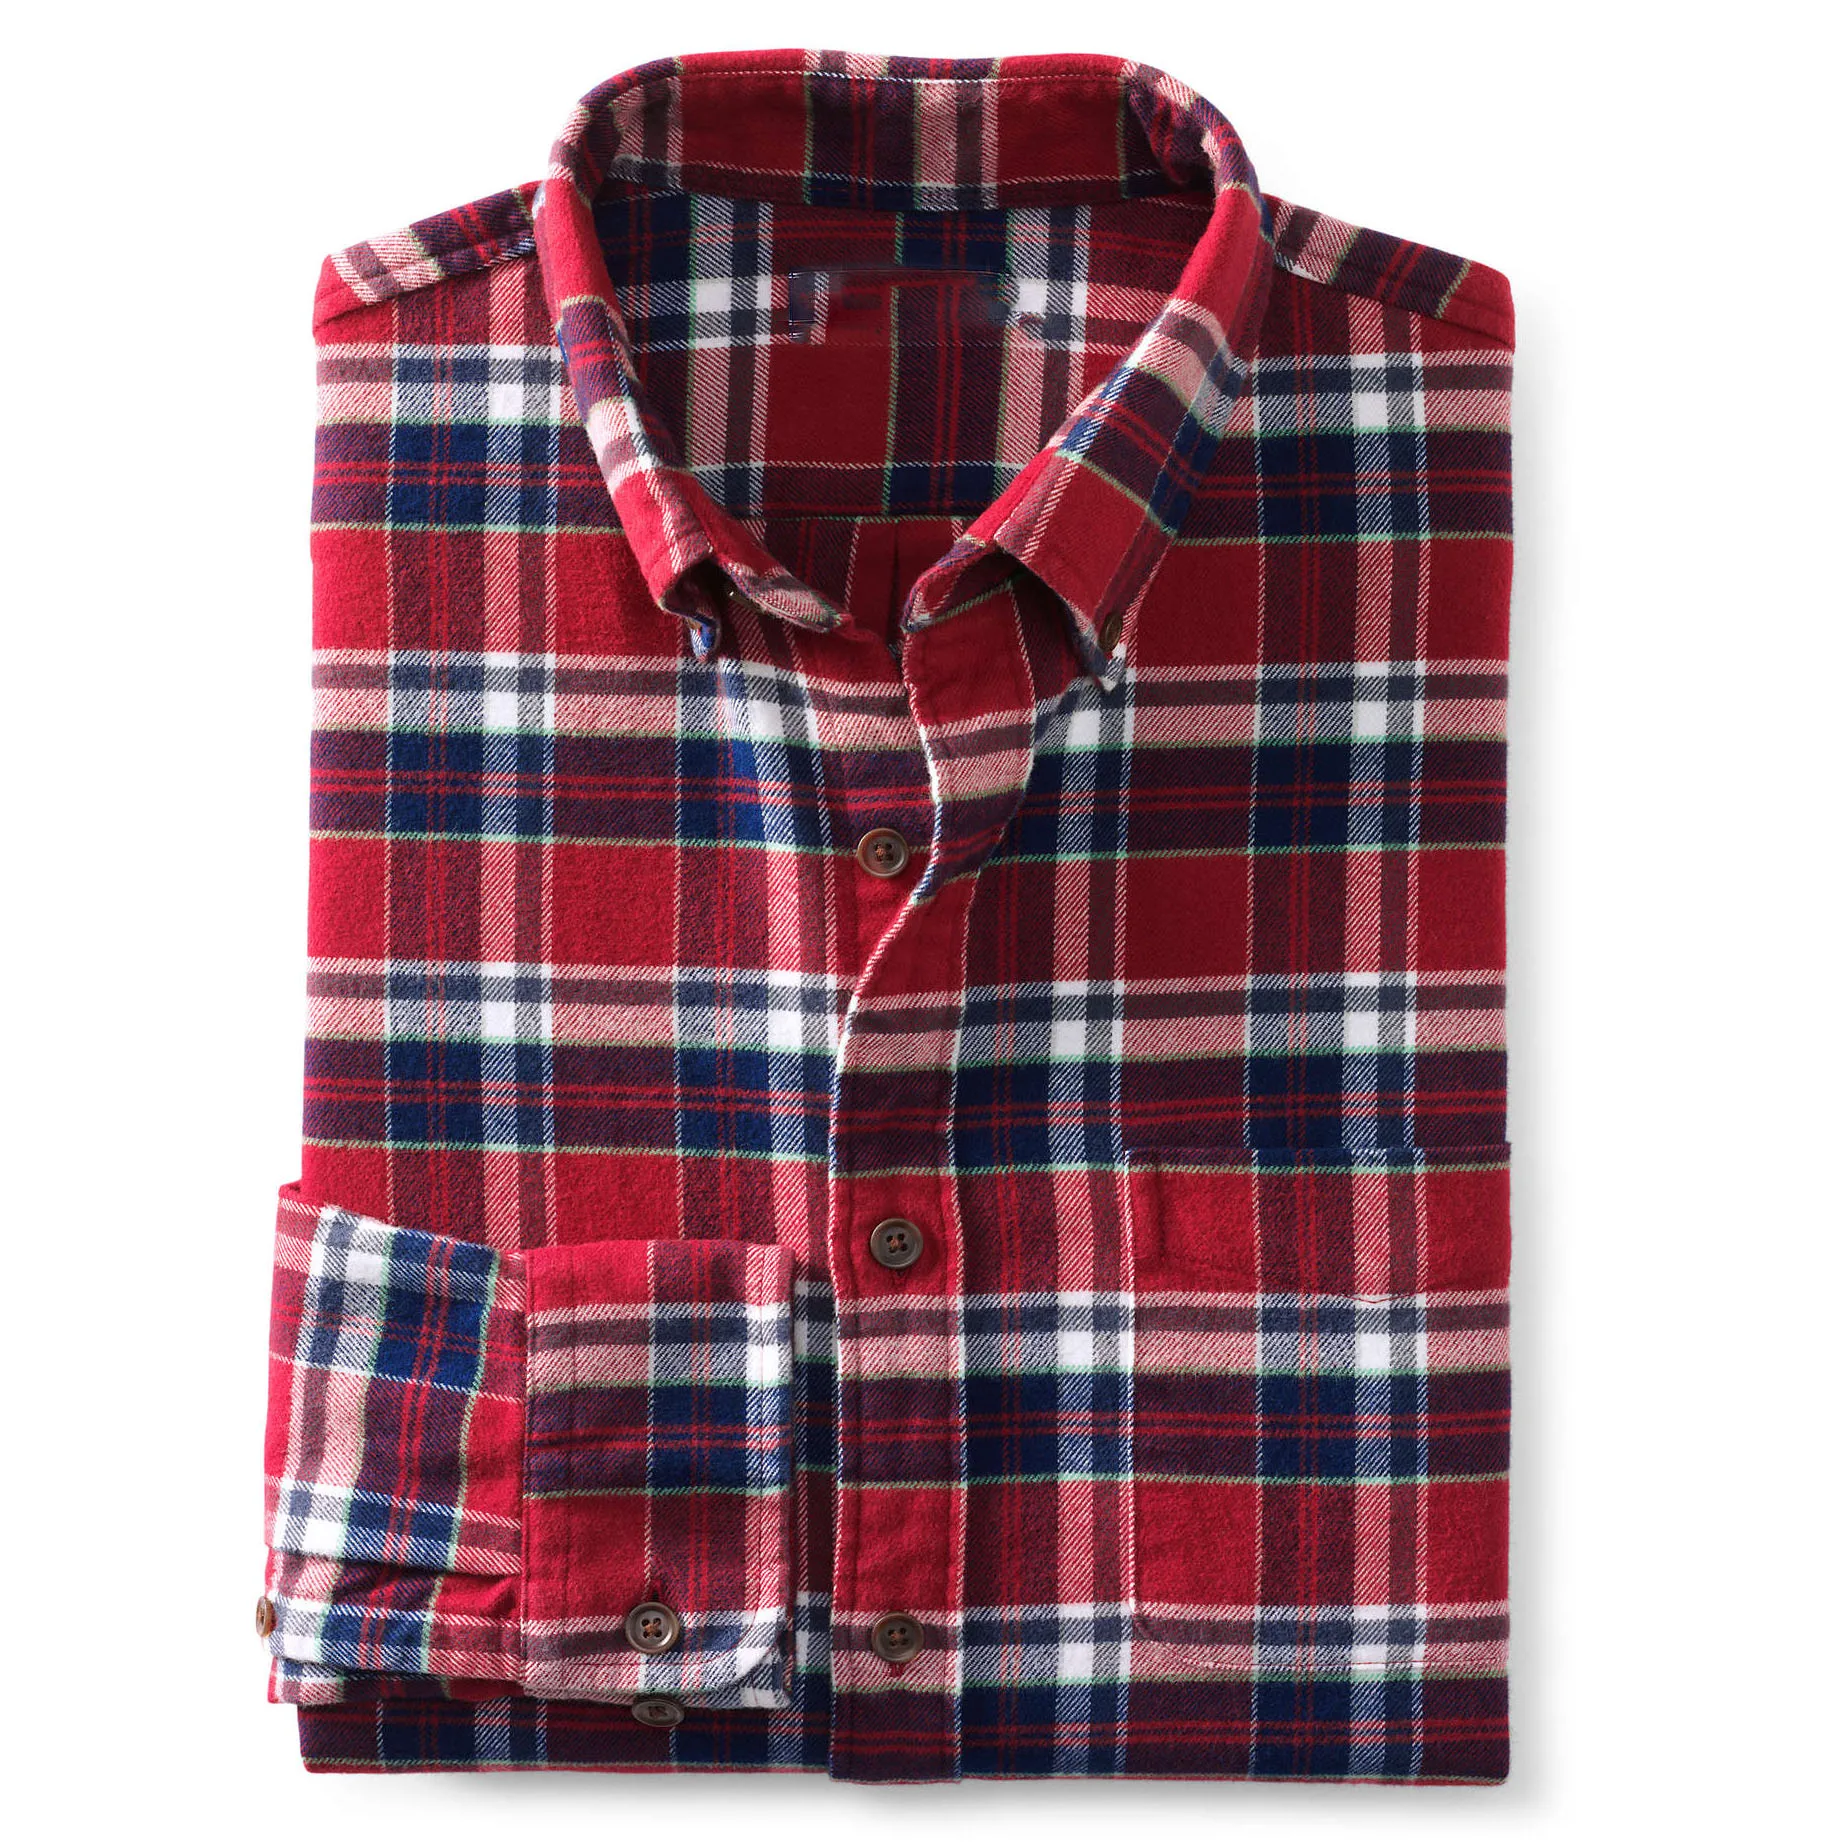 Mtm Shirt Supplier Men S Long Sleeve Logo Embroidered Rich Cardinal Plaid Flannel Shirt Buy Button Down Collar Shirt Checked Flannel Shirts Plaid And Floral Flannel Shirt Product On Alibaba Com